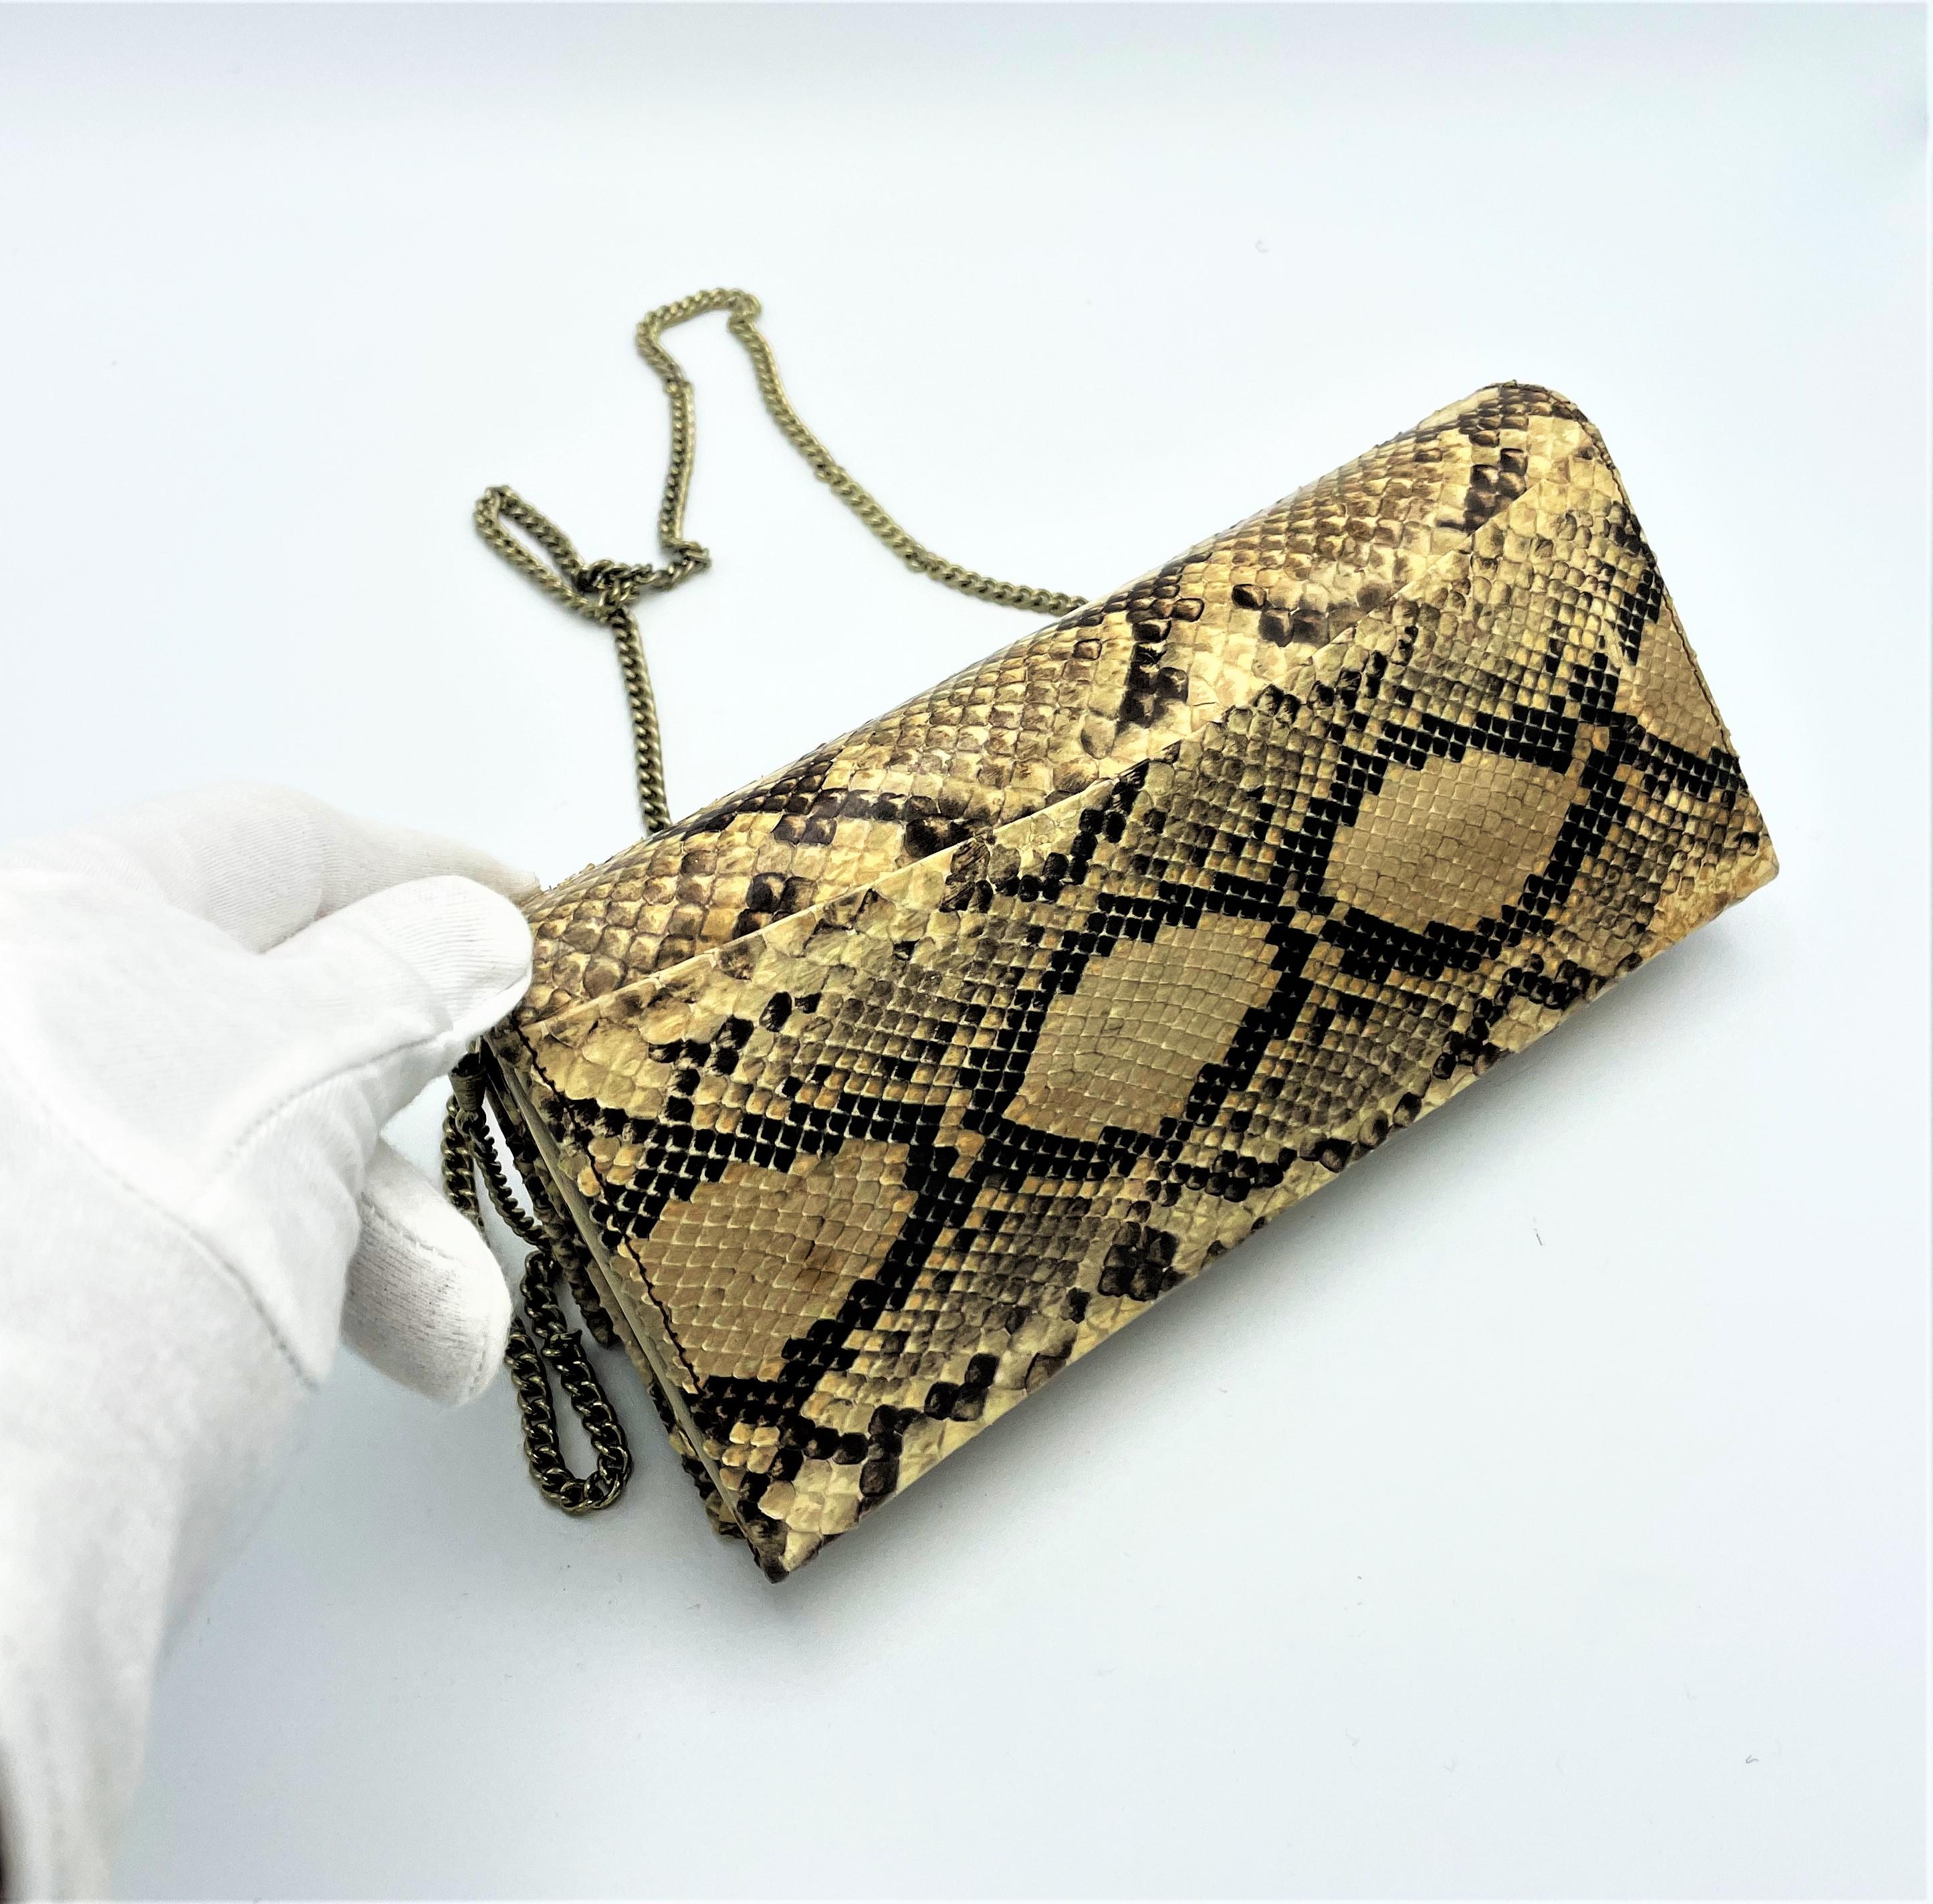 Vintage snake clutch bag with detachable lang chain, UK 1920s For Sale 7